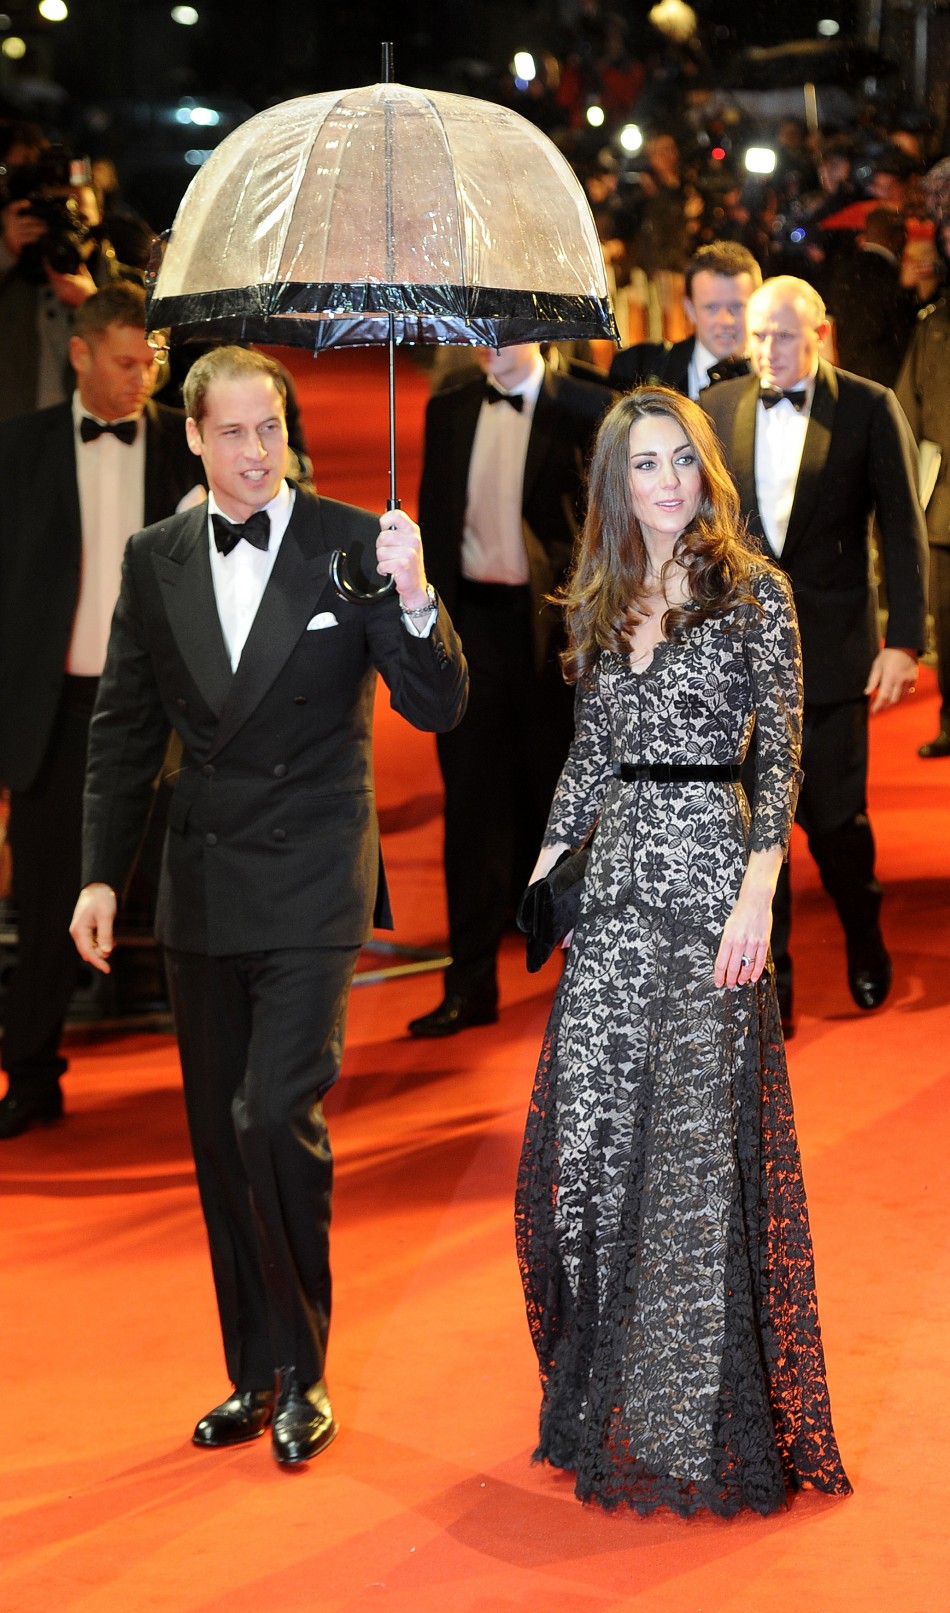 Britains Prince William arrives with Catherine, Duchess of Cambridge to the UK premiere of the film War Horse in London